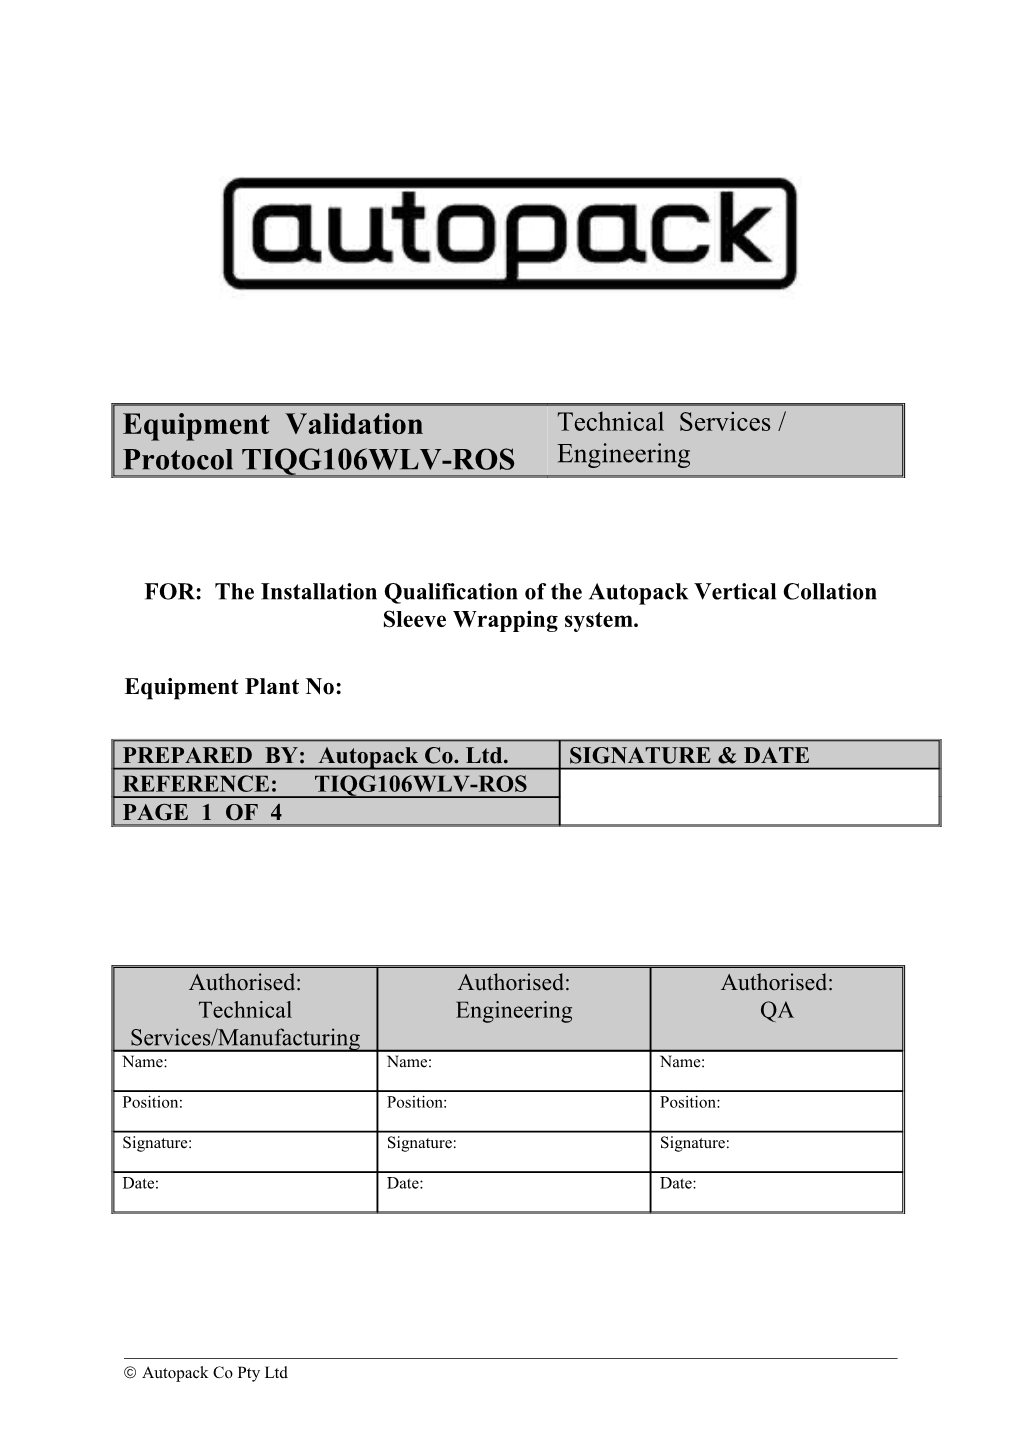 FOR: the Installation Qualification of the Autopack Vertical Collation